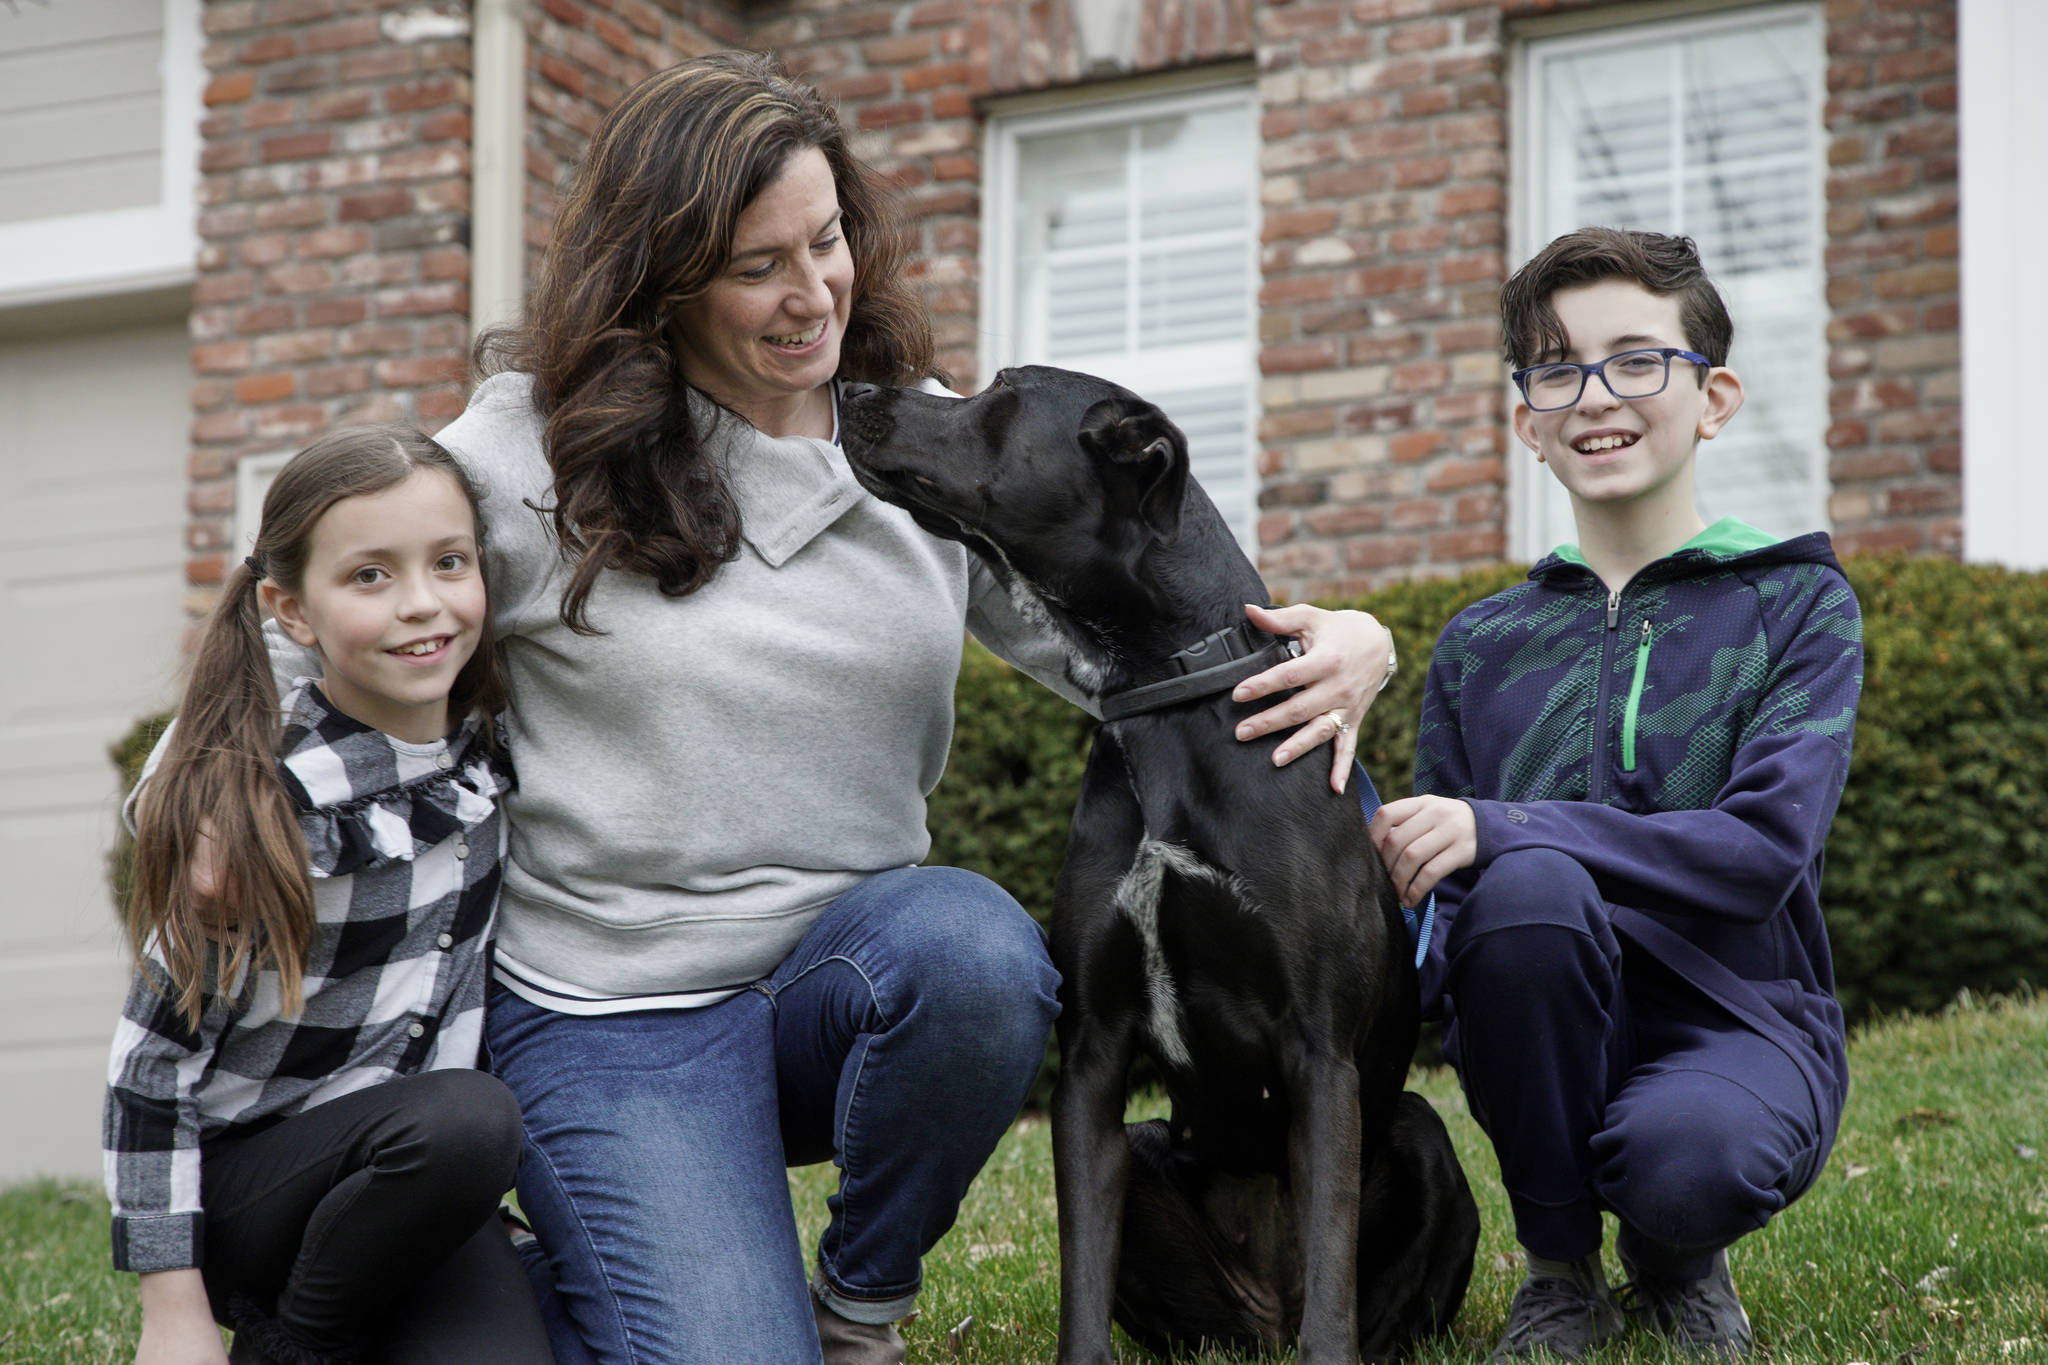 Pet fostering takes off as coronavirus keeps Americans home